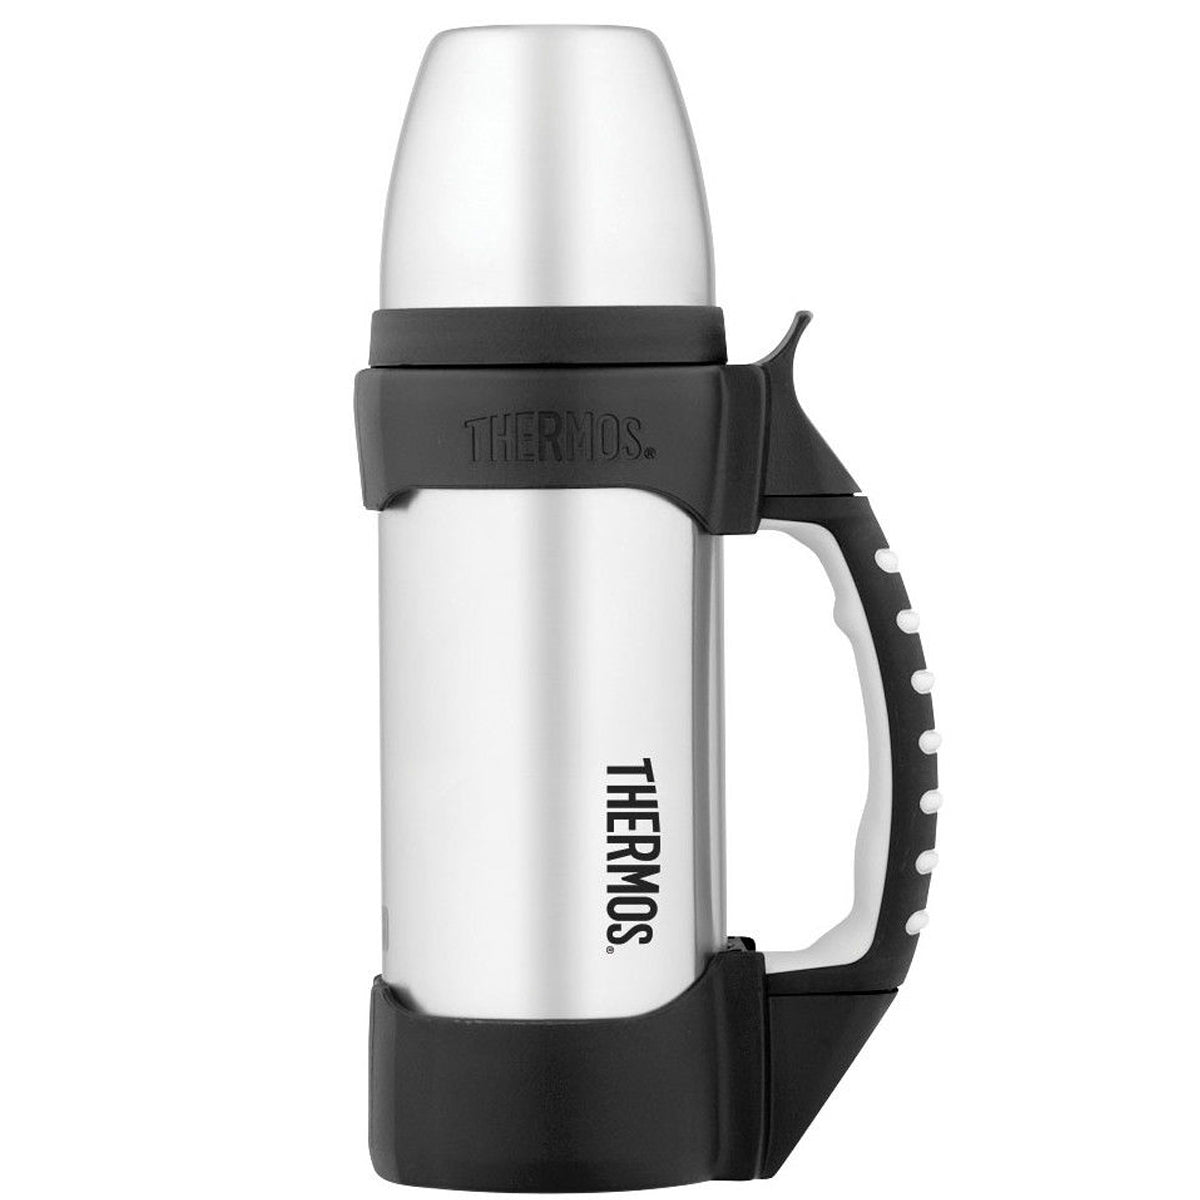 Thermos 1.1 qt. Rock Work Series Stainless Steel Beverage Bottle - Silver/Black Thermos